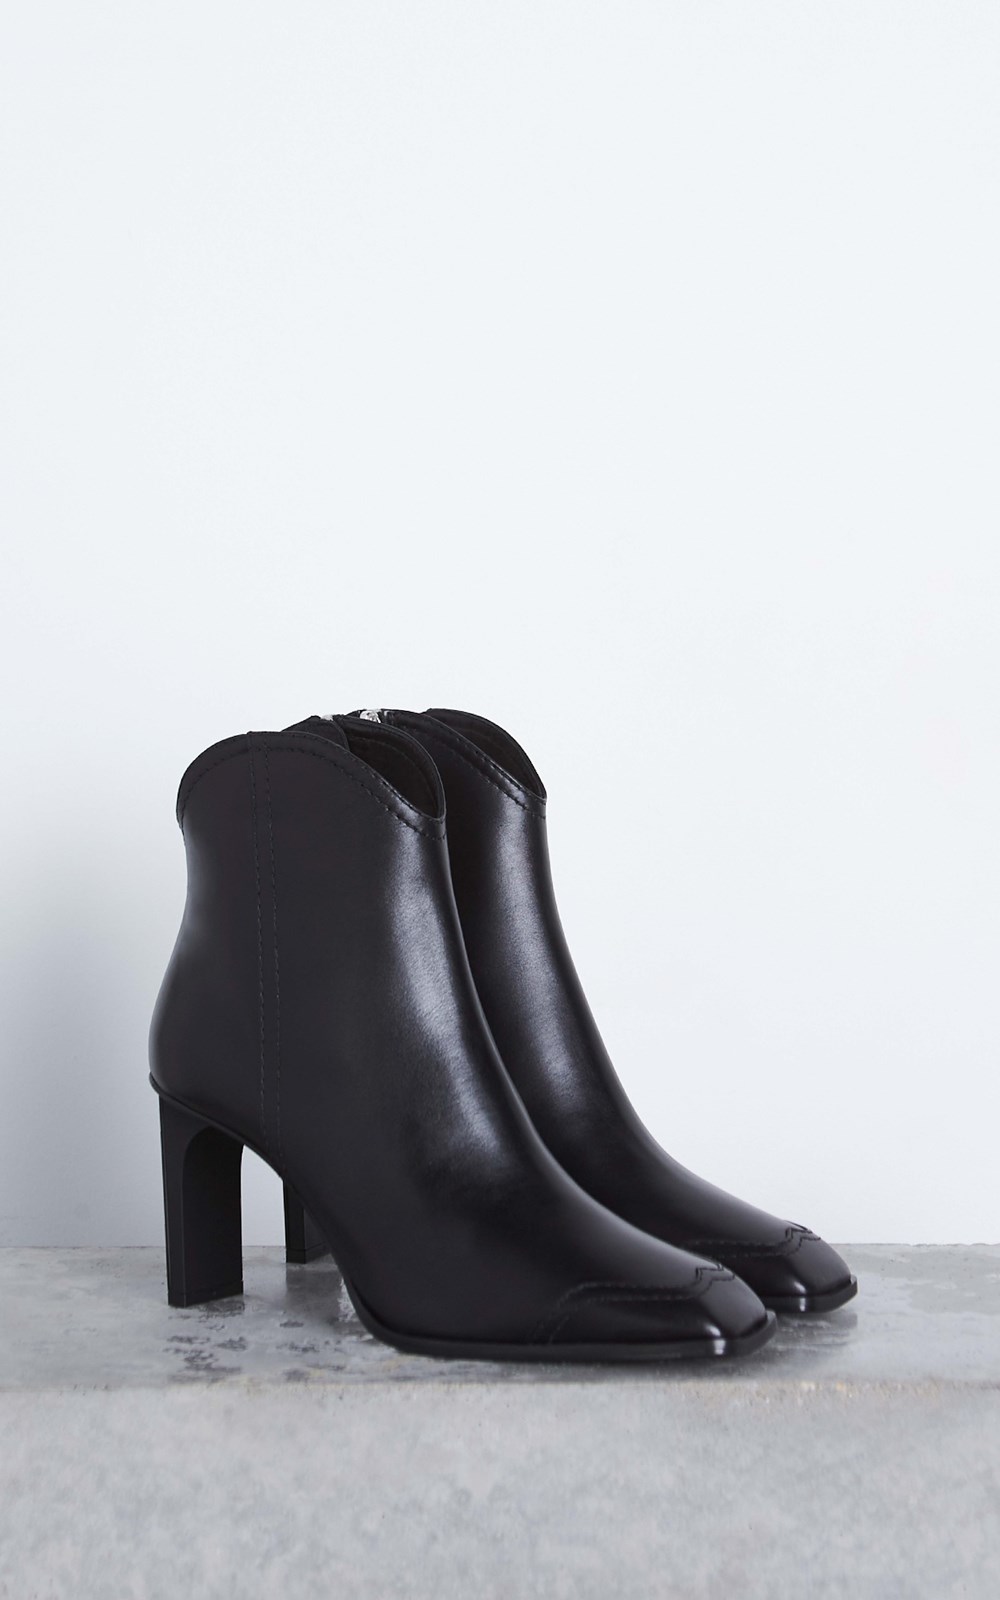 COWBOY THIGH HIGH BOOT by Dion Lee